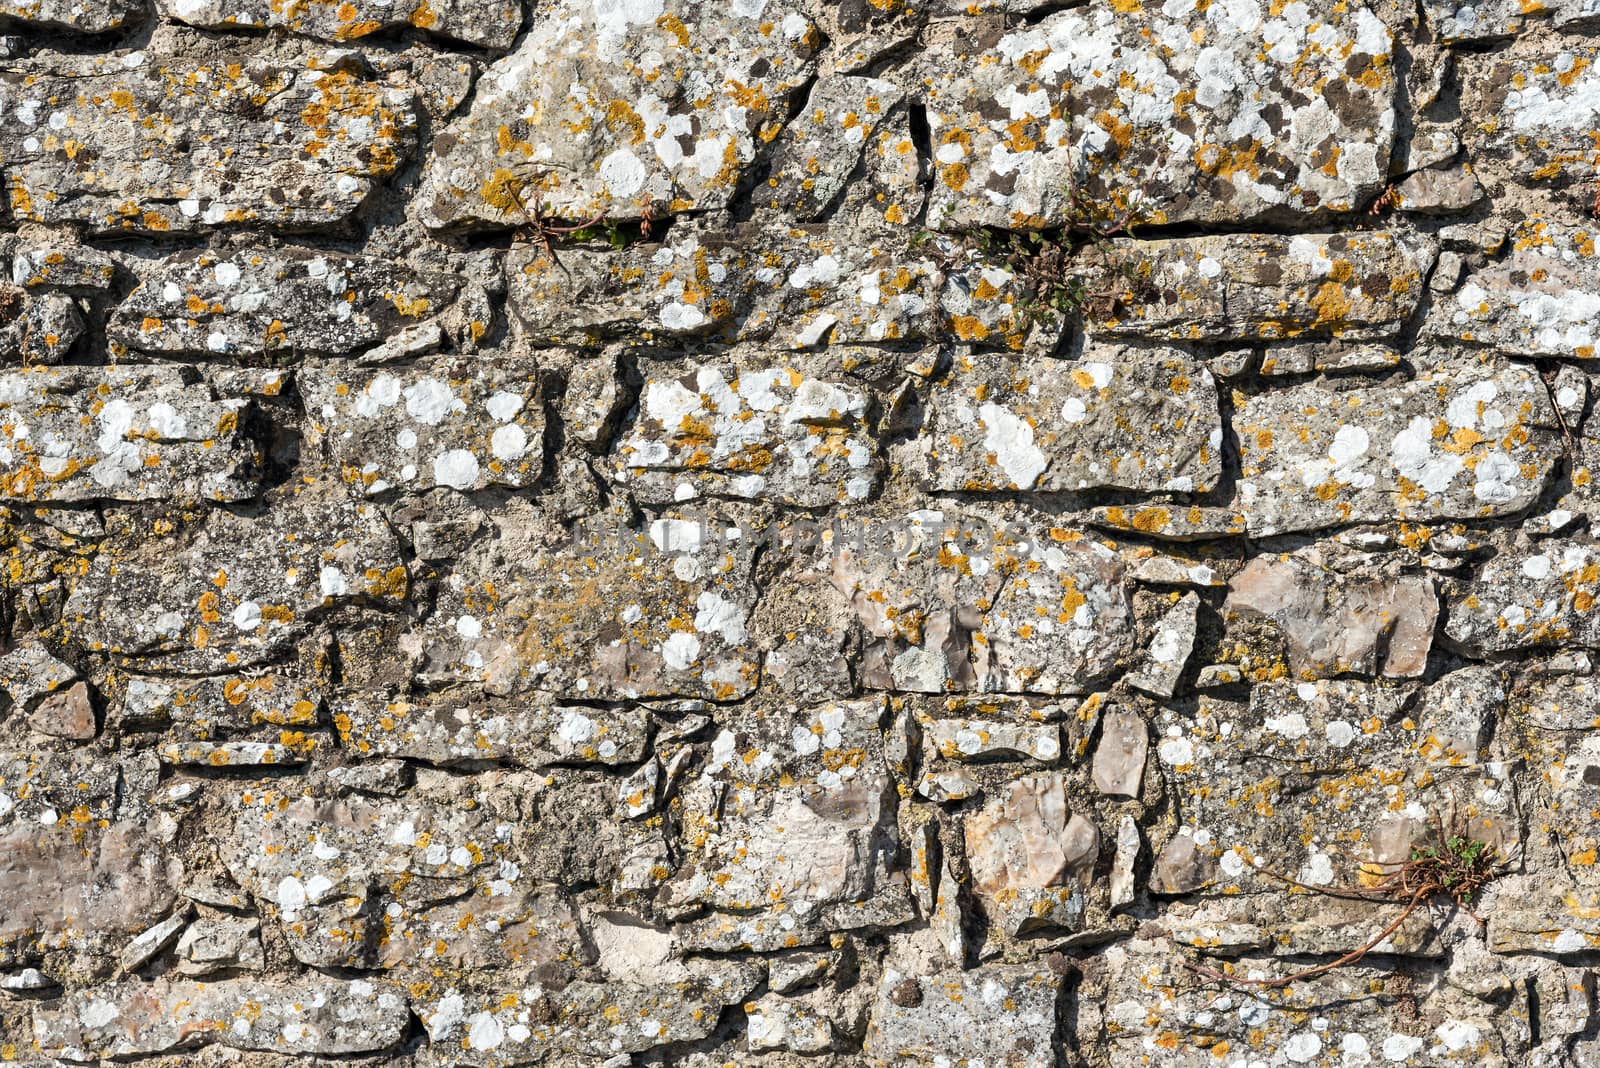 Background from a rough wall of natural stone